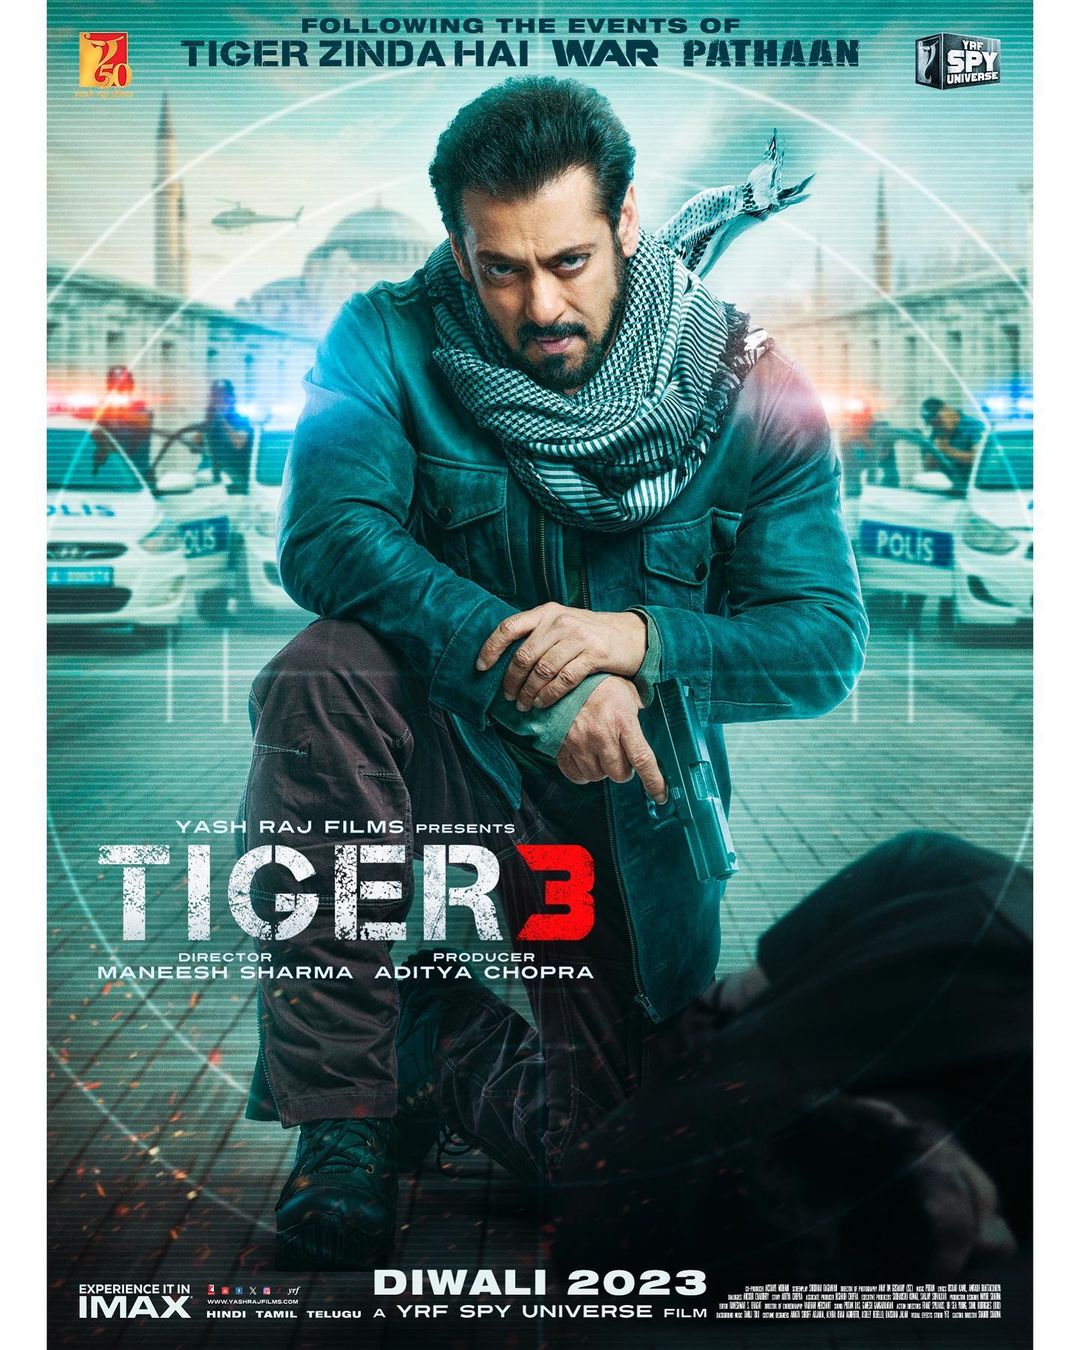 Ahead of trailer release, Salman Khan treats fans with Tiger 3 new poster